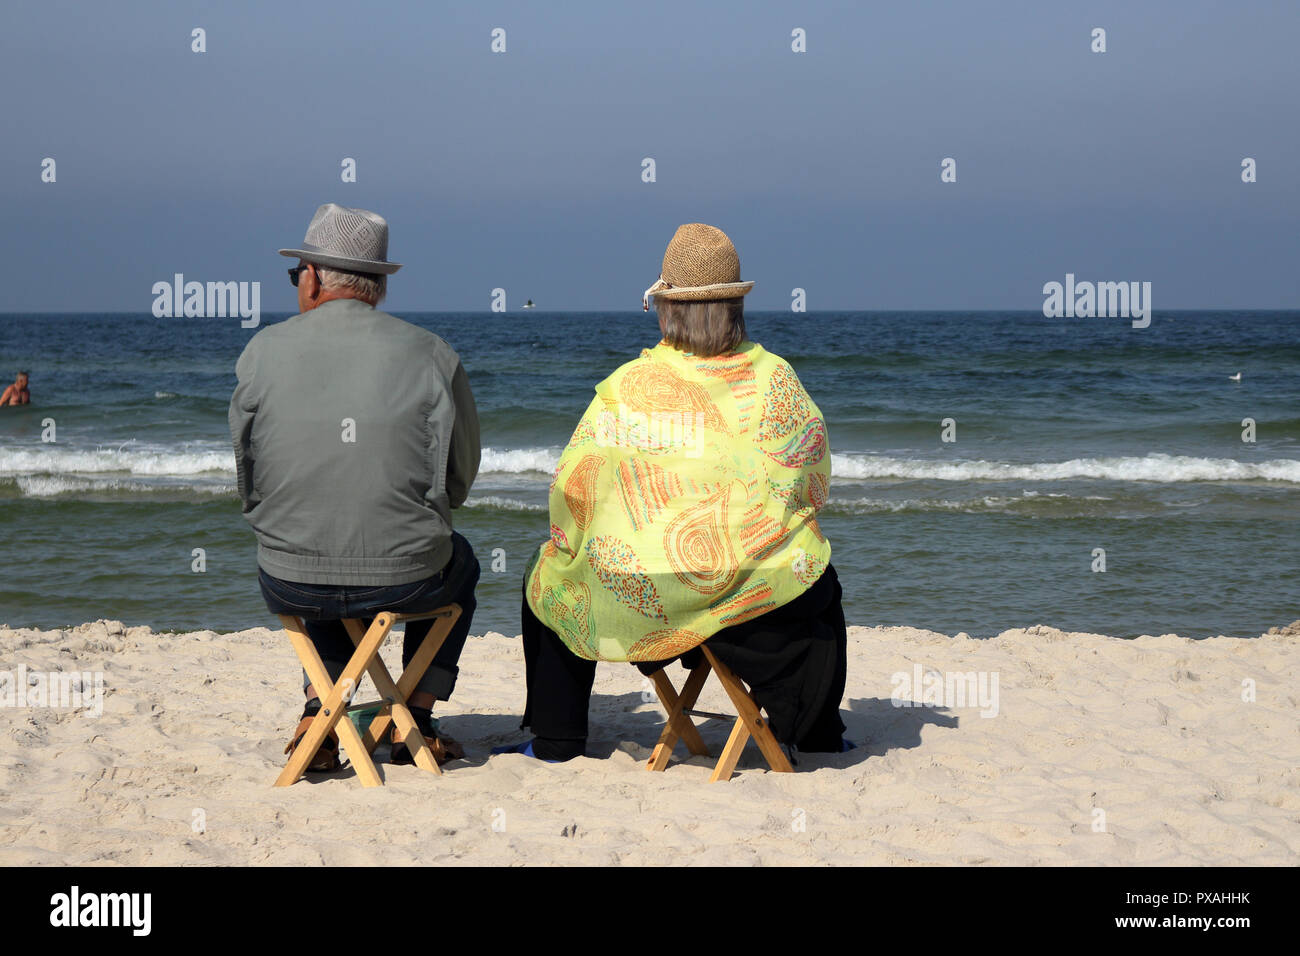 An elderly couple sit on wooden stools on the beach and watch the sea. Stock Photo